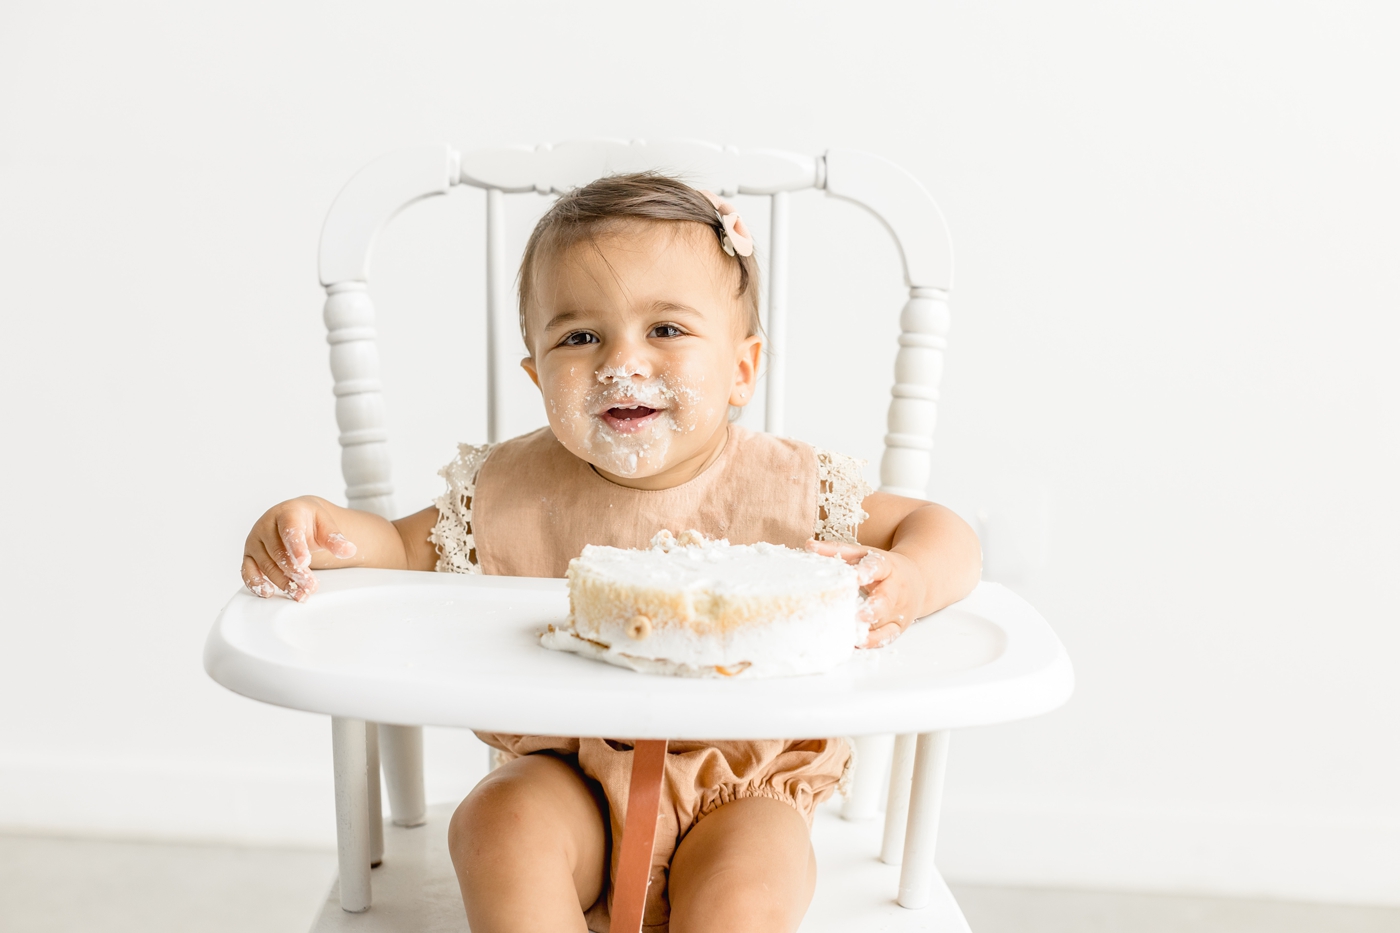 Smiling baby girl after cake smash. Photo by Sana Ahmed Photography.